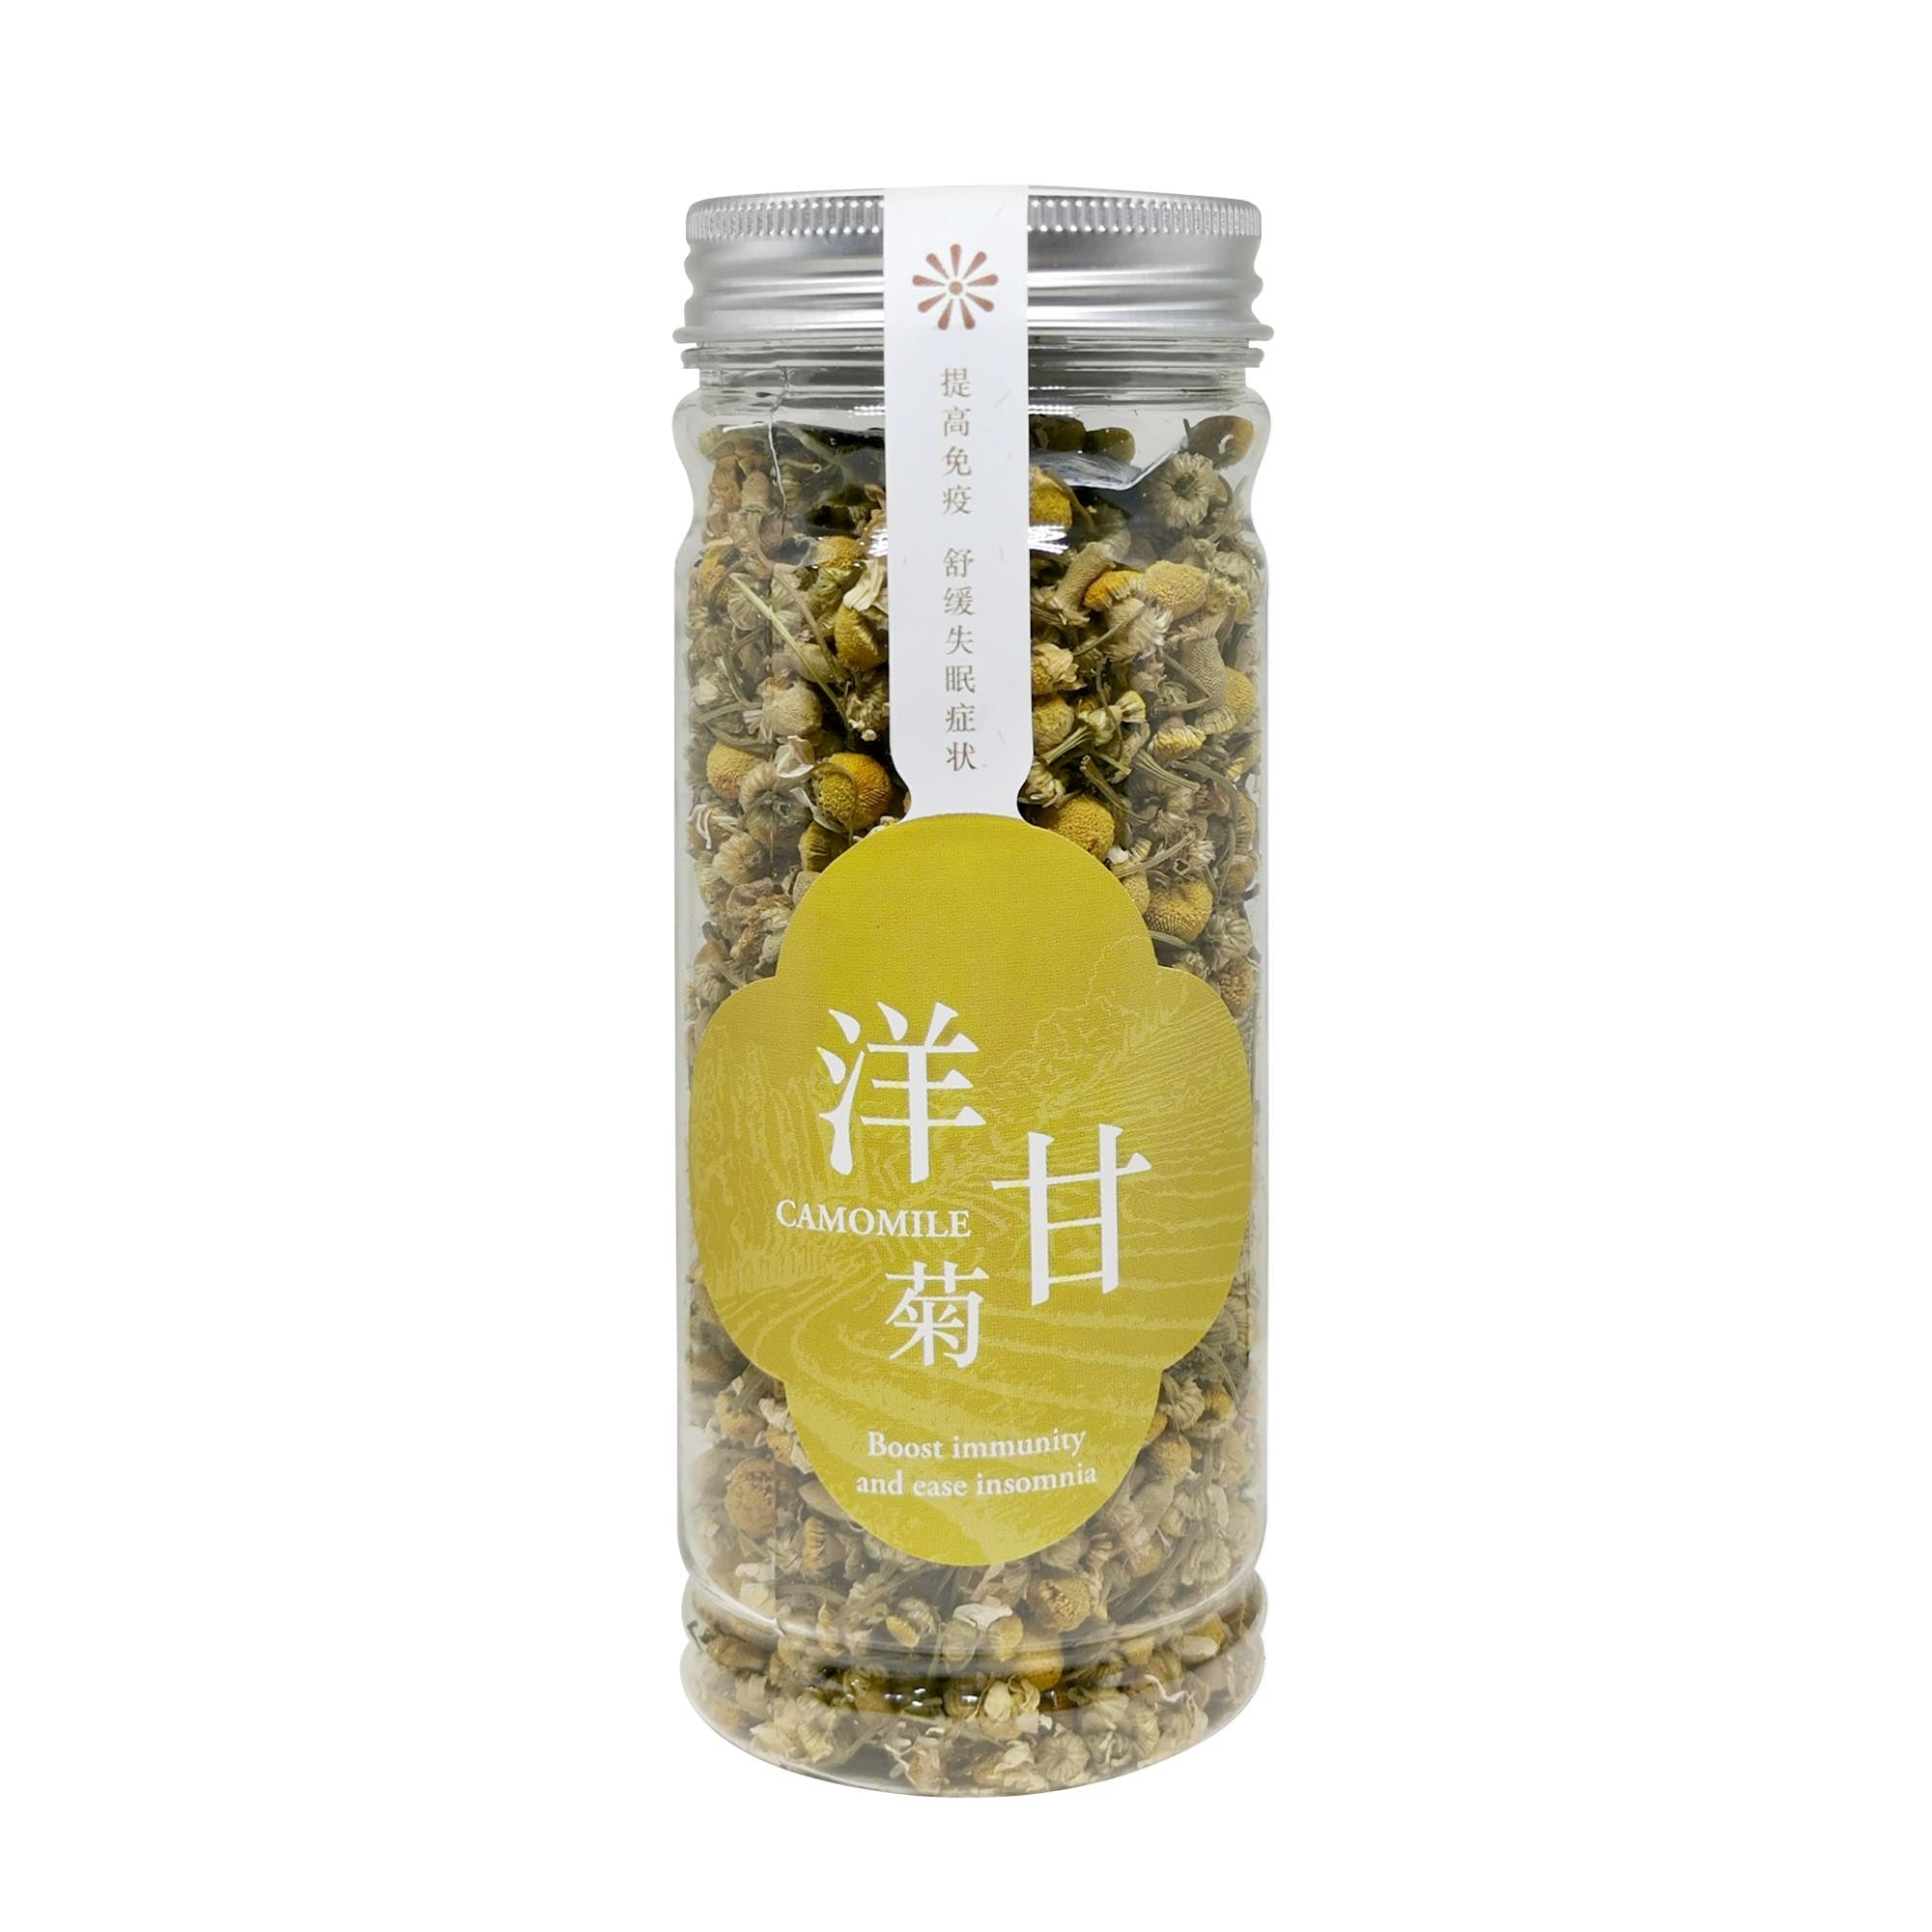 Wing Joo Loong Dried Camomile Flowers 30g 洋甘菊